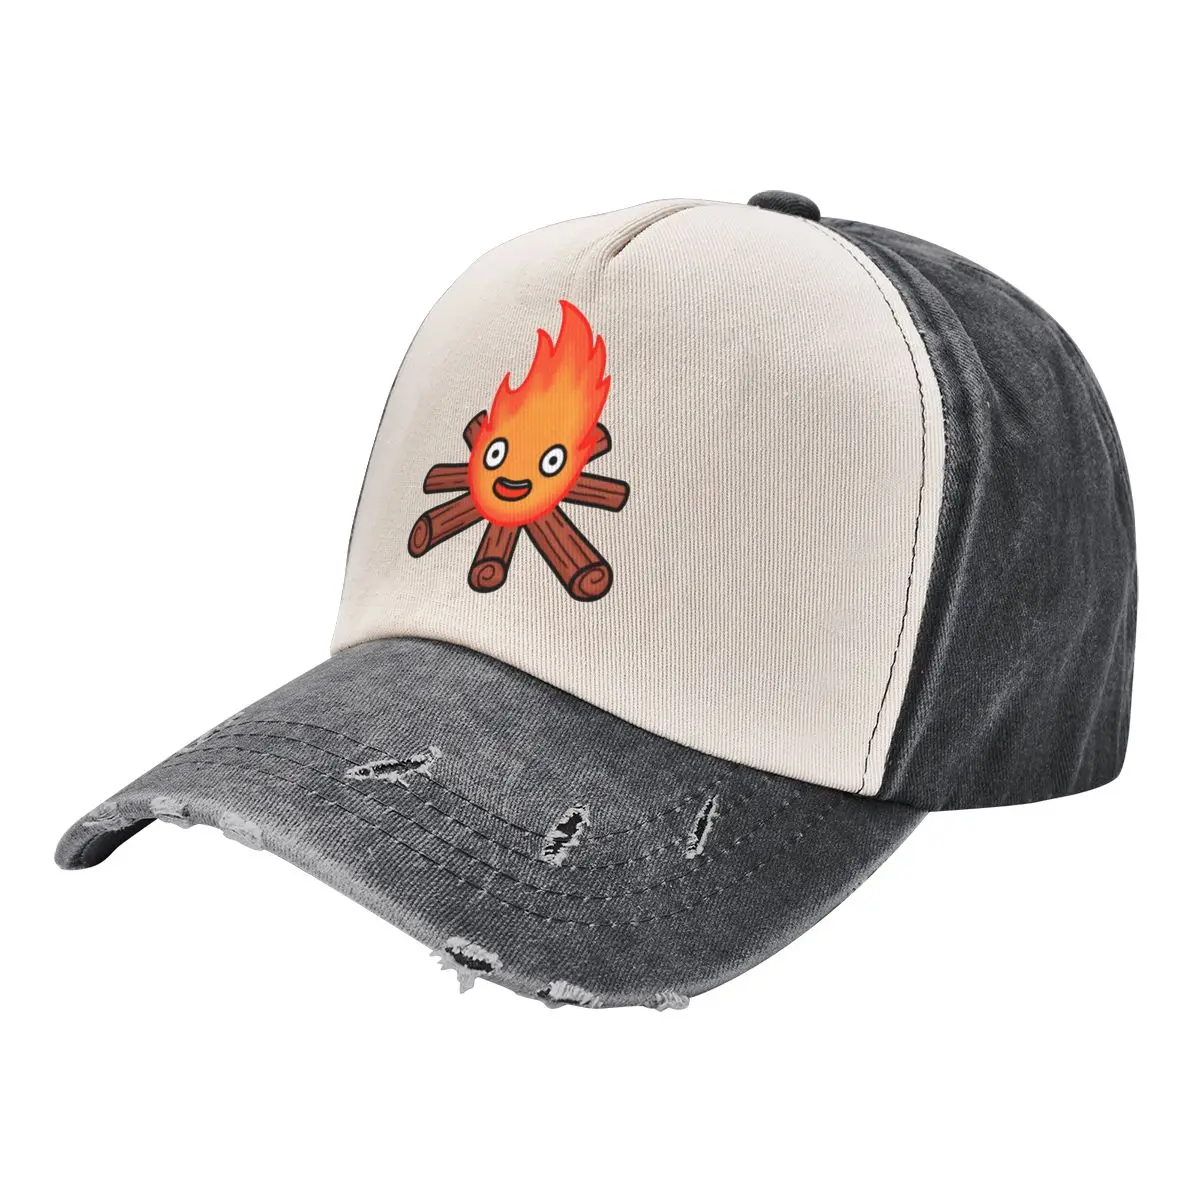 

Campfire Calcifier Fire Baseball Caps Merch Vintage Distressed Denim Washed Casquette Dad Hat Unisex Style Summer Hats Cap